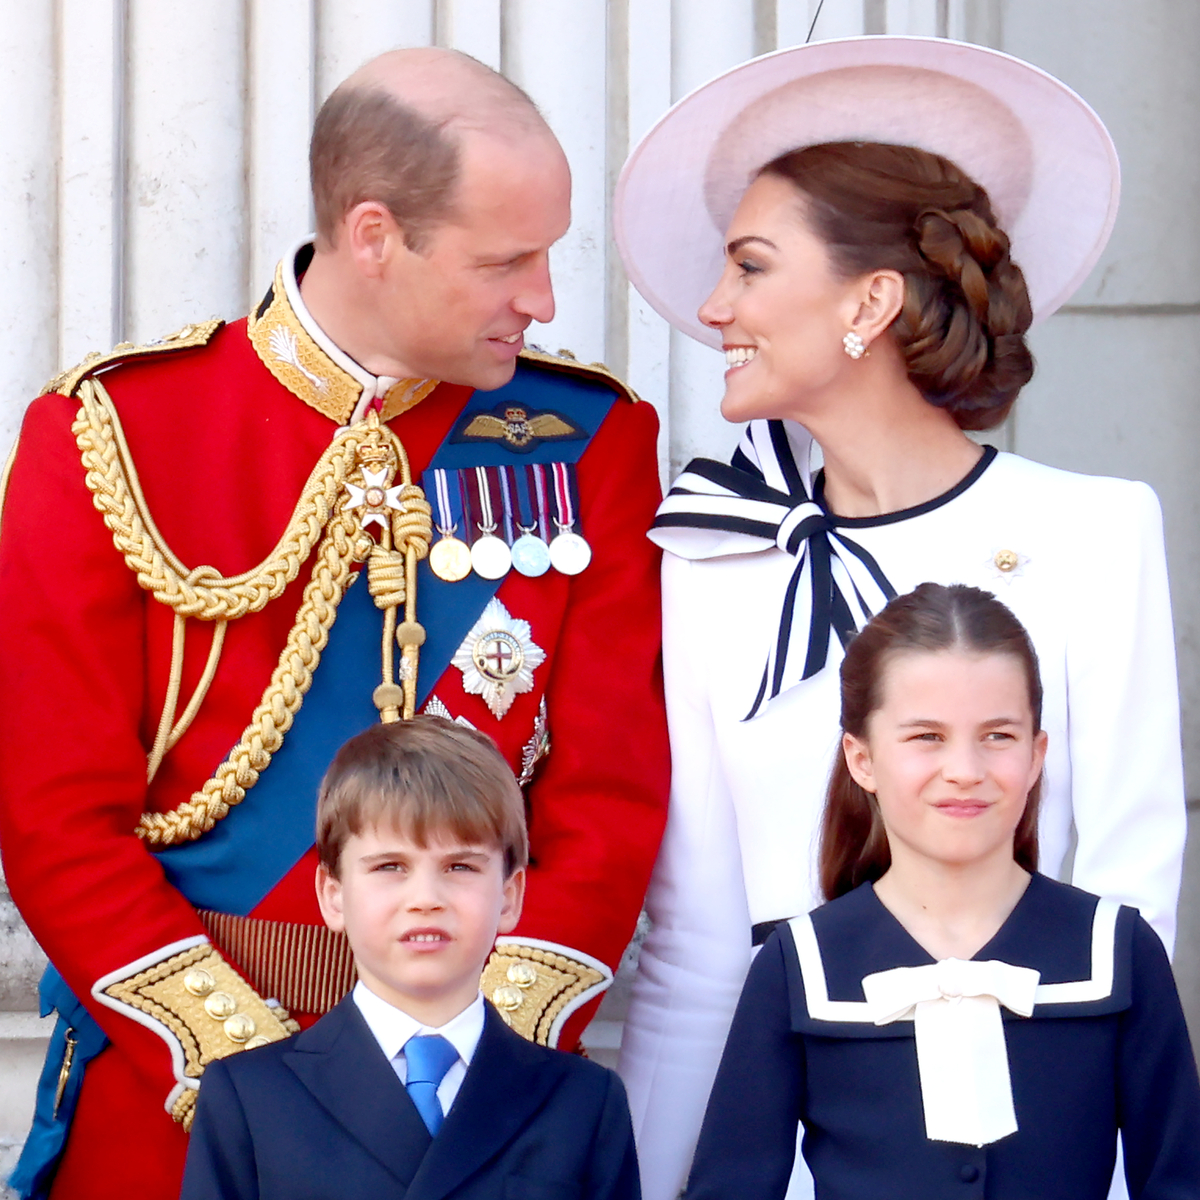 Supporting Kate Middleton: Prince William’s Role in Her Health Struggle